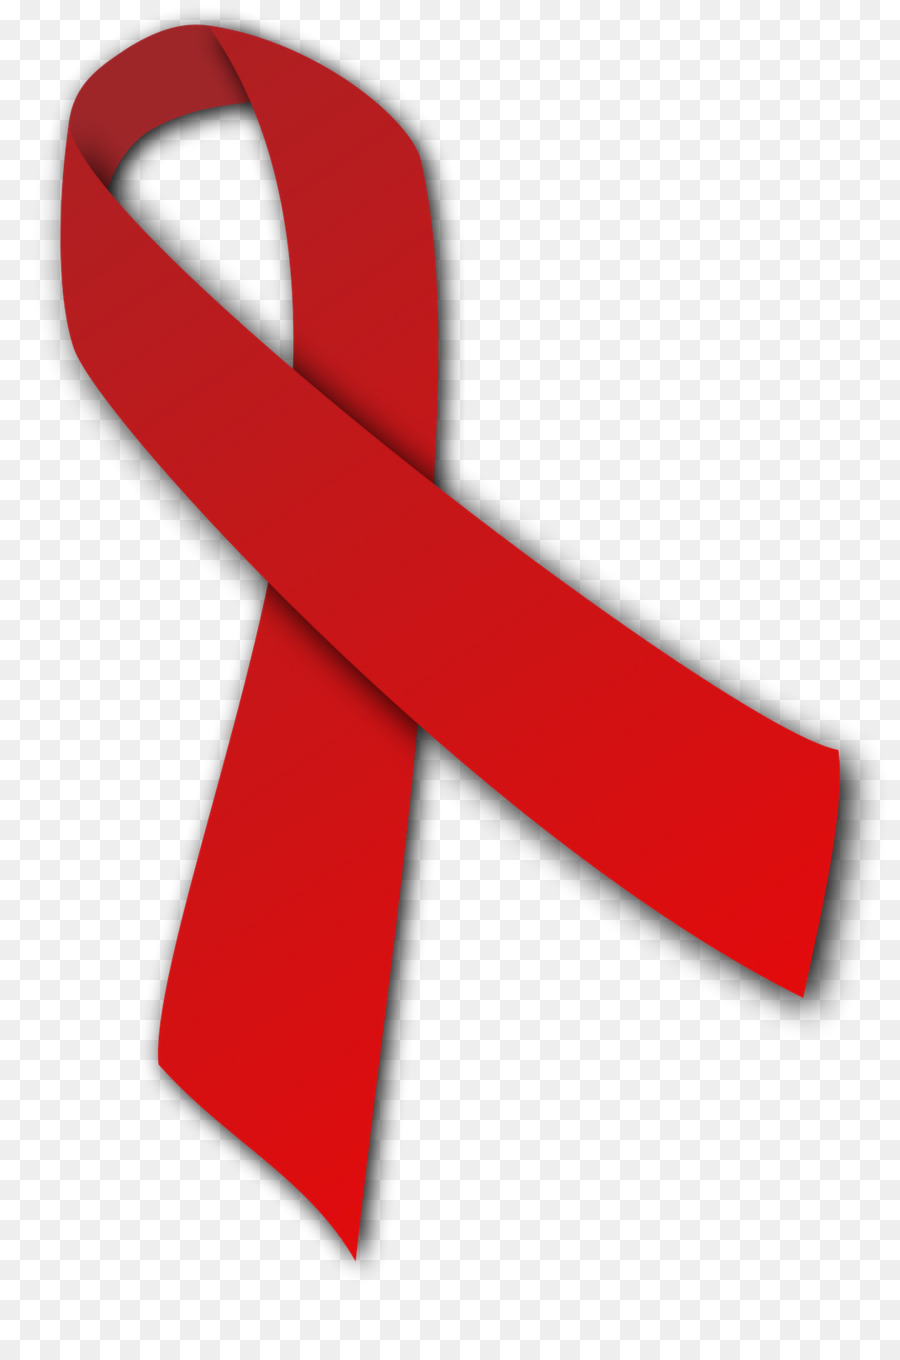 Epidemiology of HIV/AIDS Red ribbon World AIDS Day HIV-positive people - Hiv Cliparts png download - 1071*1600 - Free Transparent Epidemiology Of Hivaids png Download.